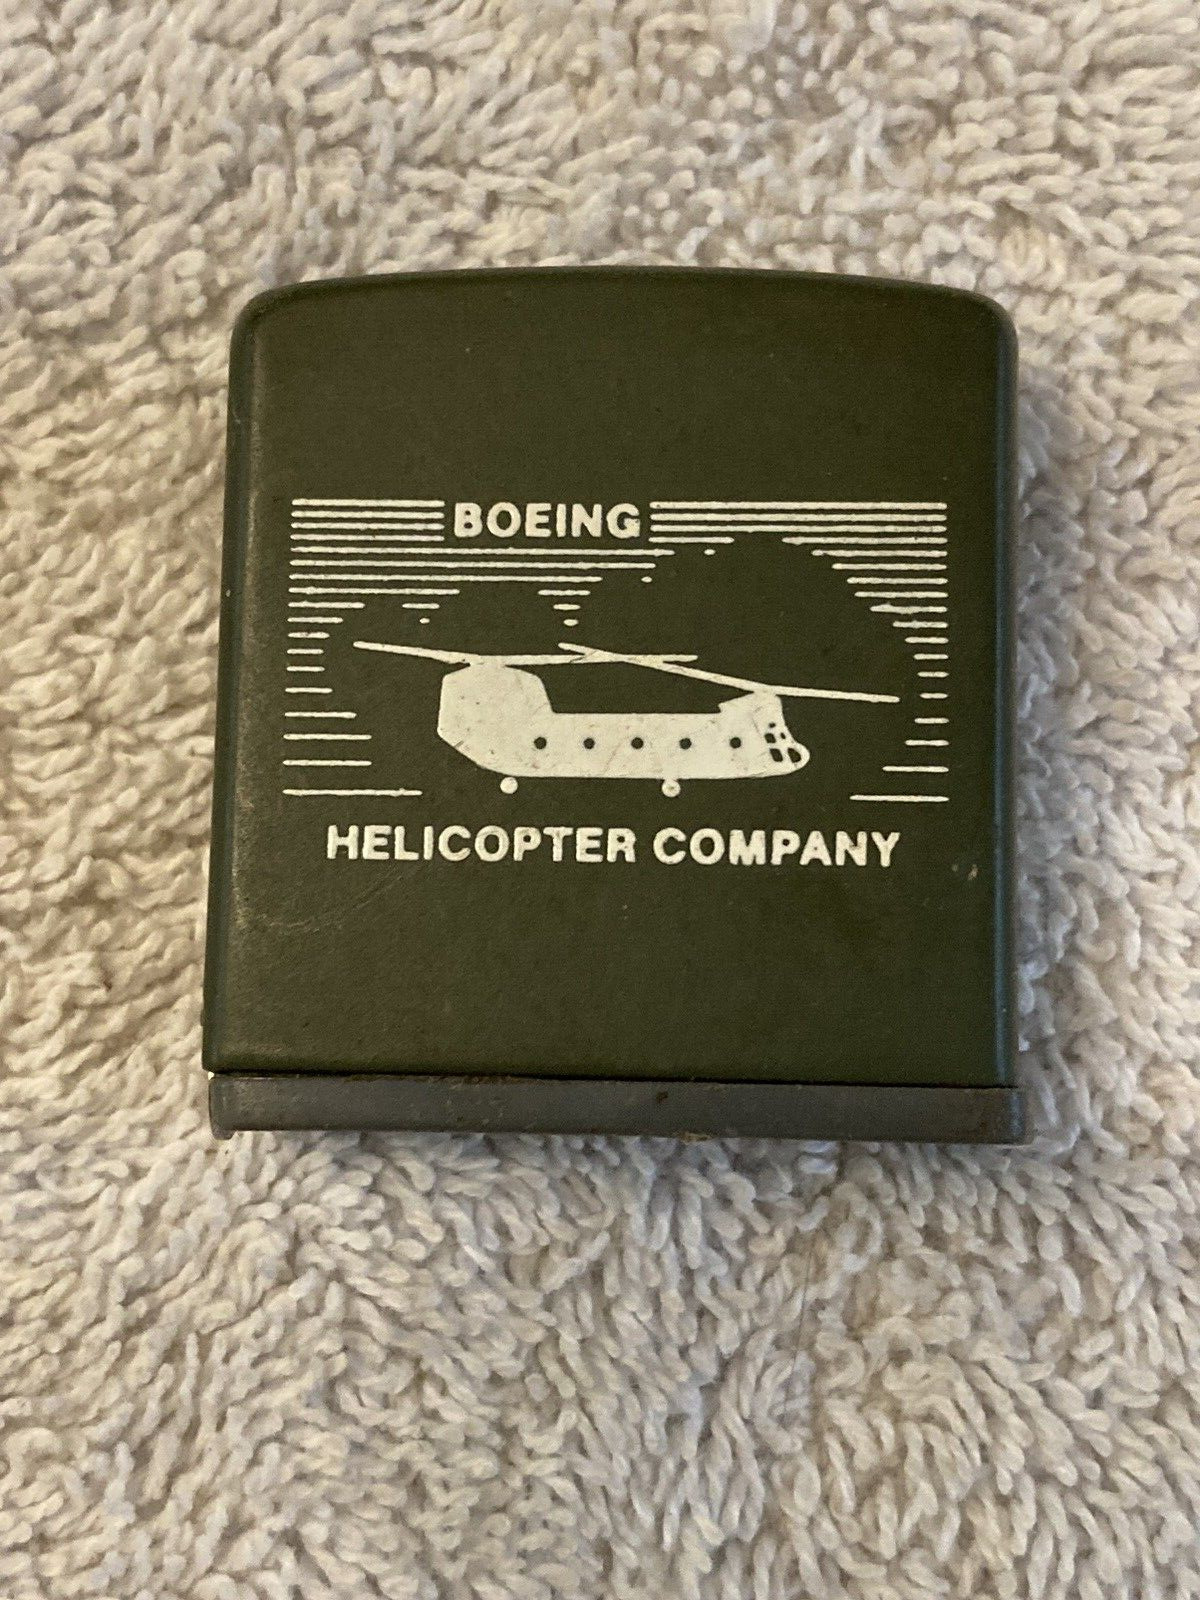 Vintage ZIPPO Advertising Tape Measure, Boeing Helicopter Company.